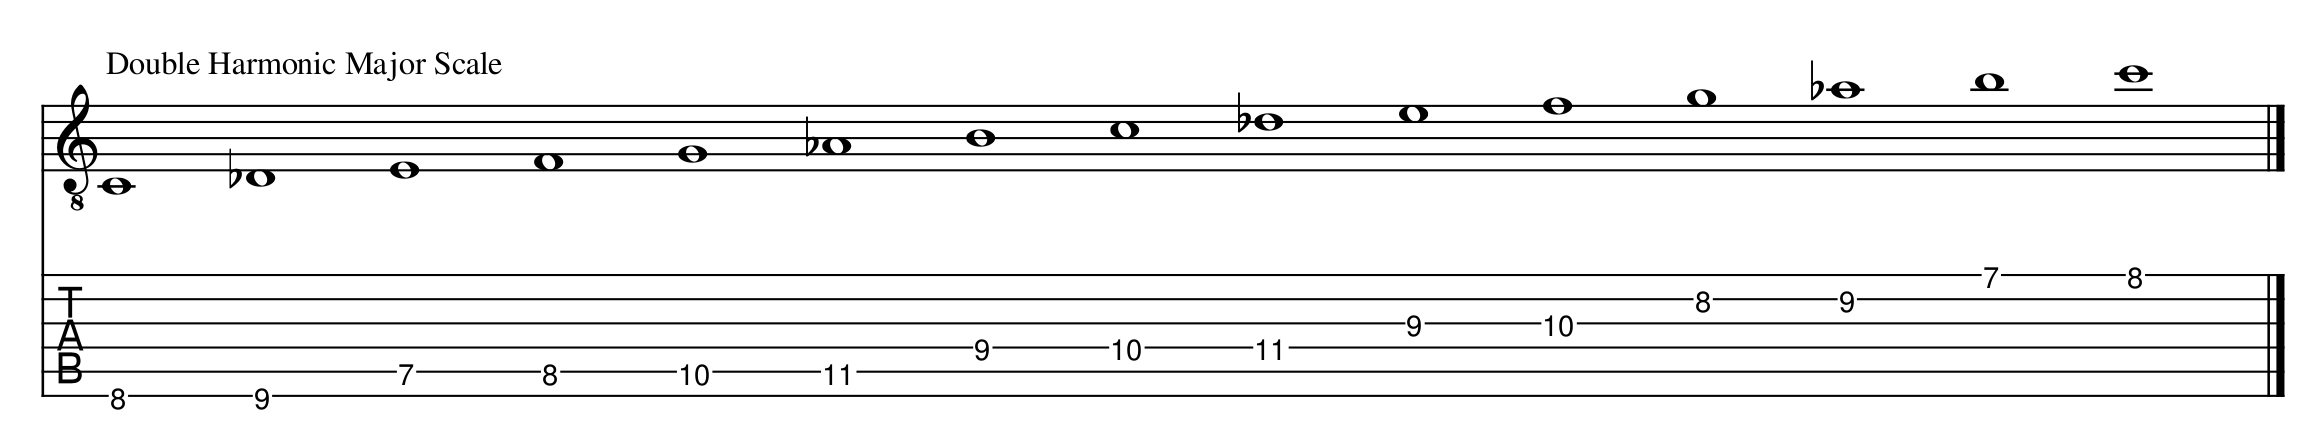 The double harmonic major scale tablature and notes